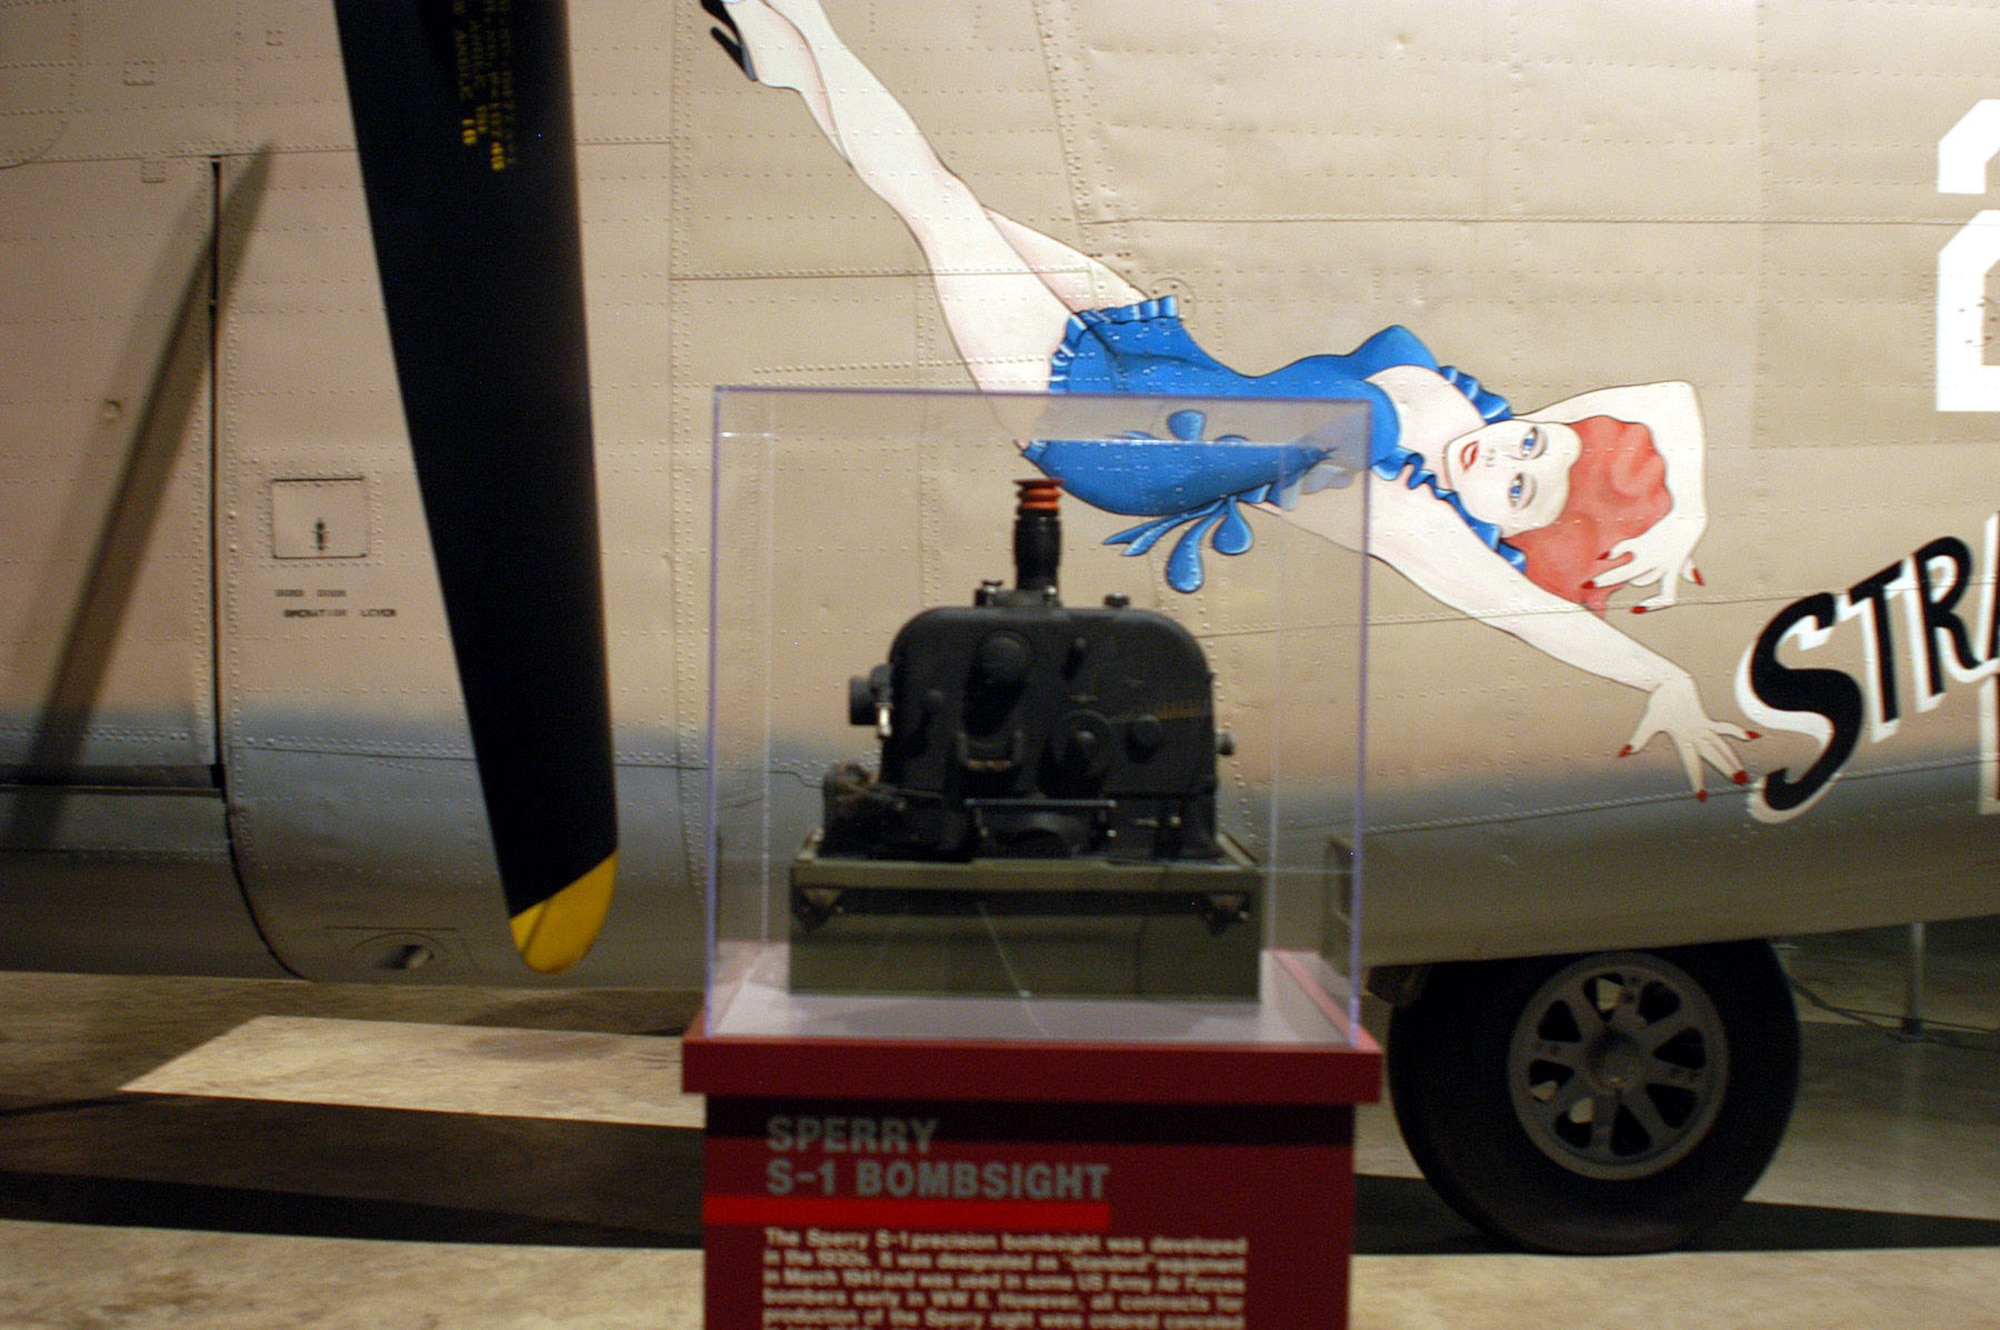 DAYTON, Ohio -- Sperry S-1 Bombsight on display in the World War II Gallery at the National Museum of the United States Air Force. (U.S. Air Force photo)